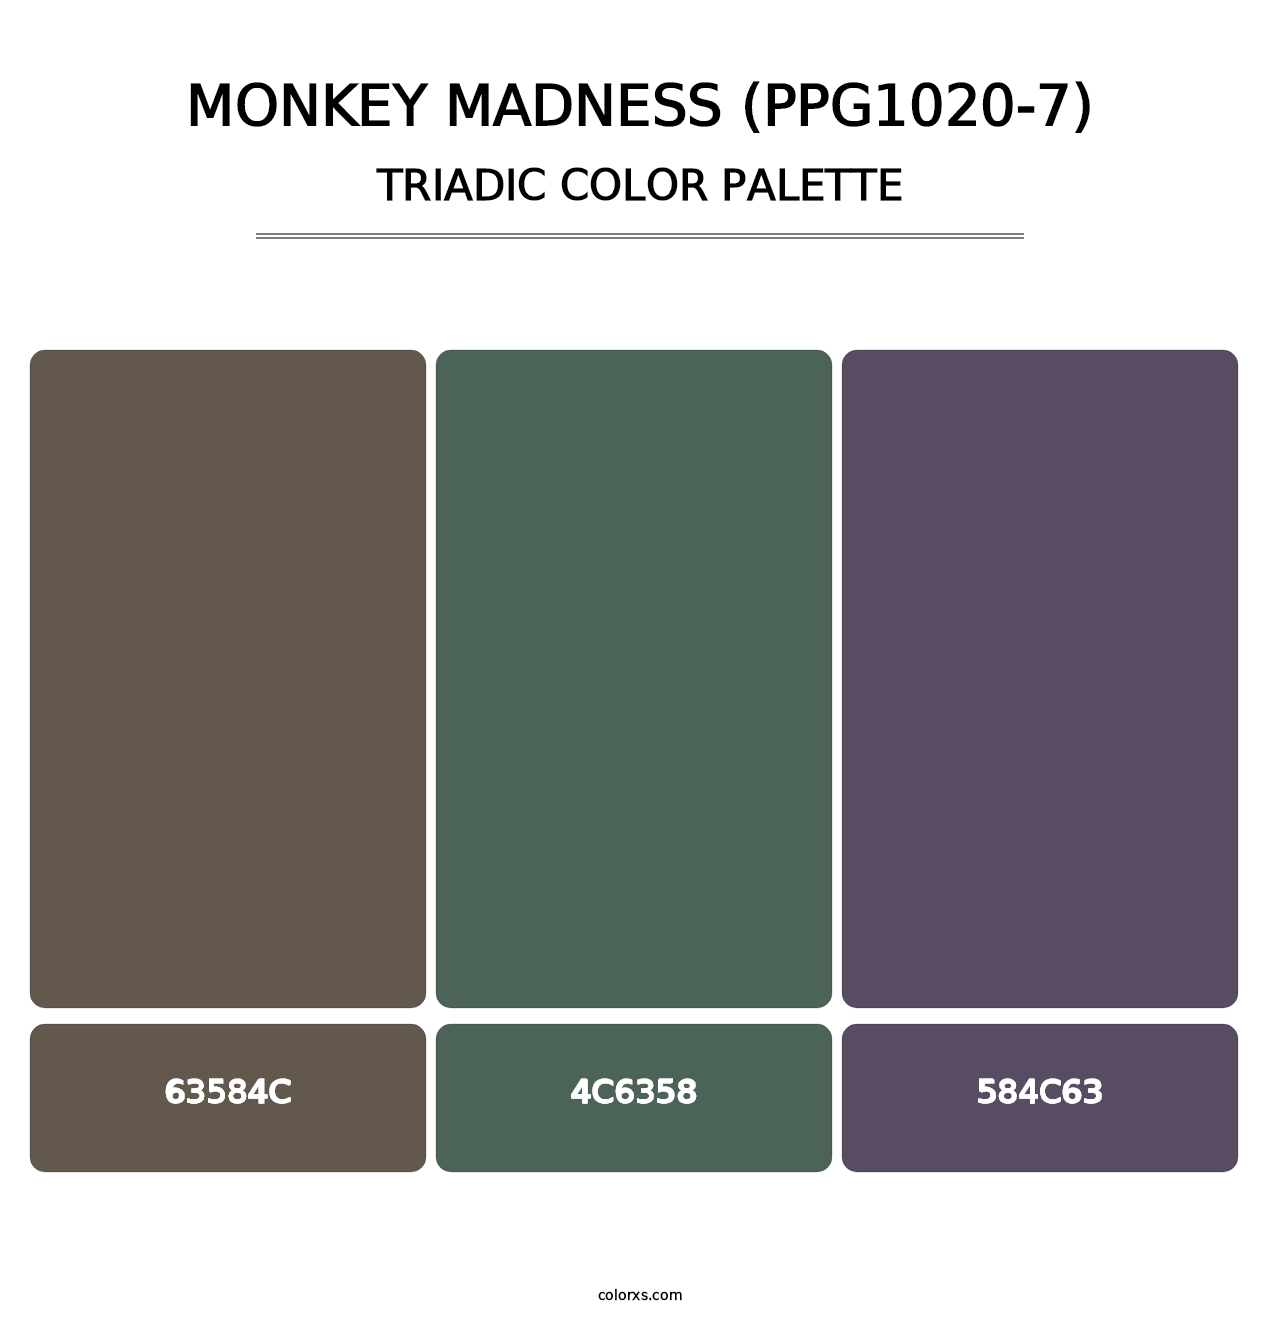 Monkey Madness (PPG1020-7) - Triadic Color Palette